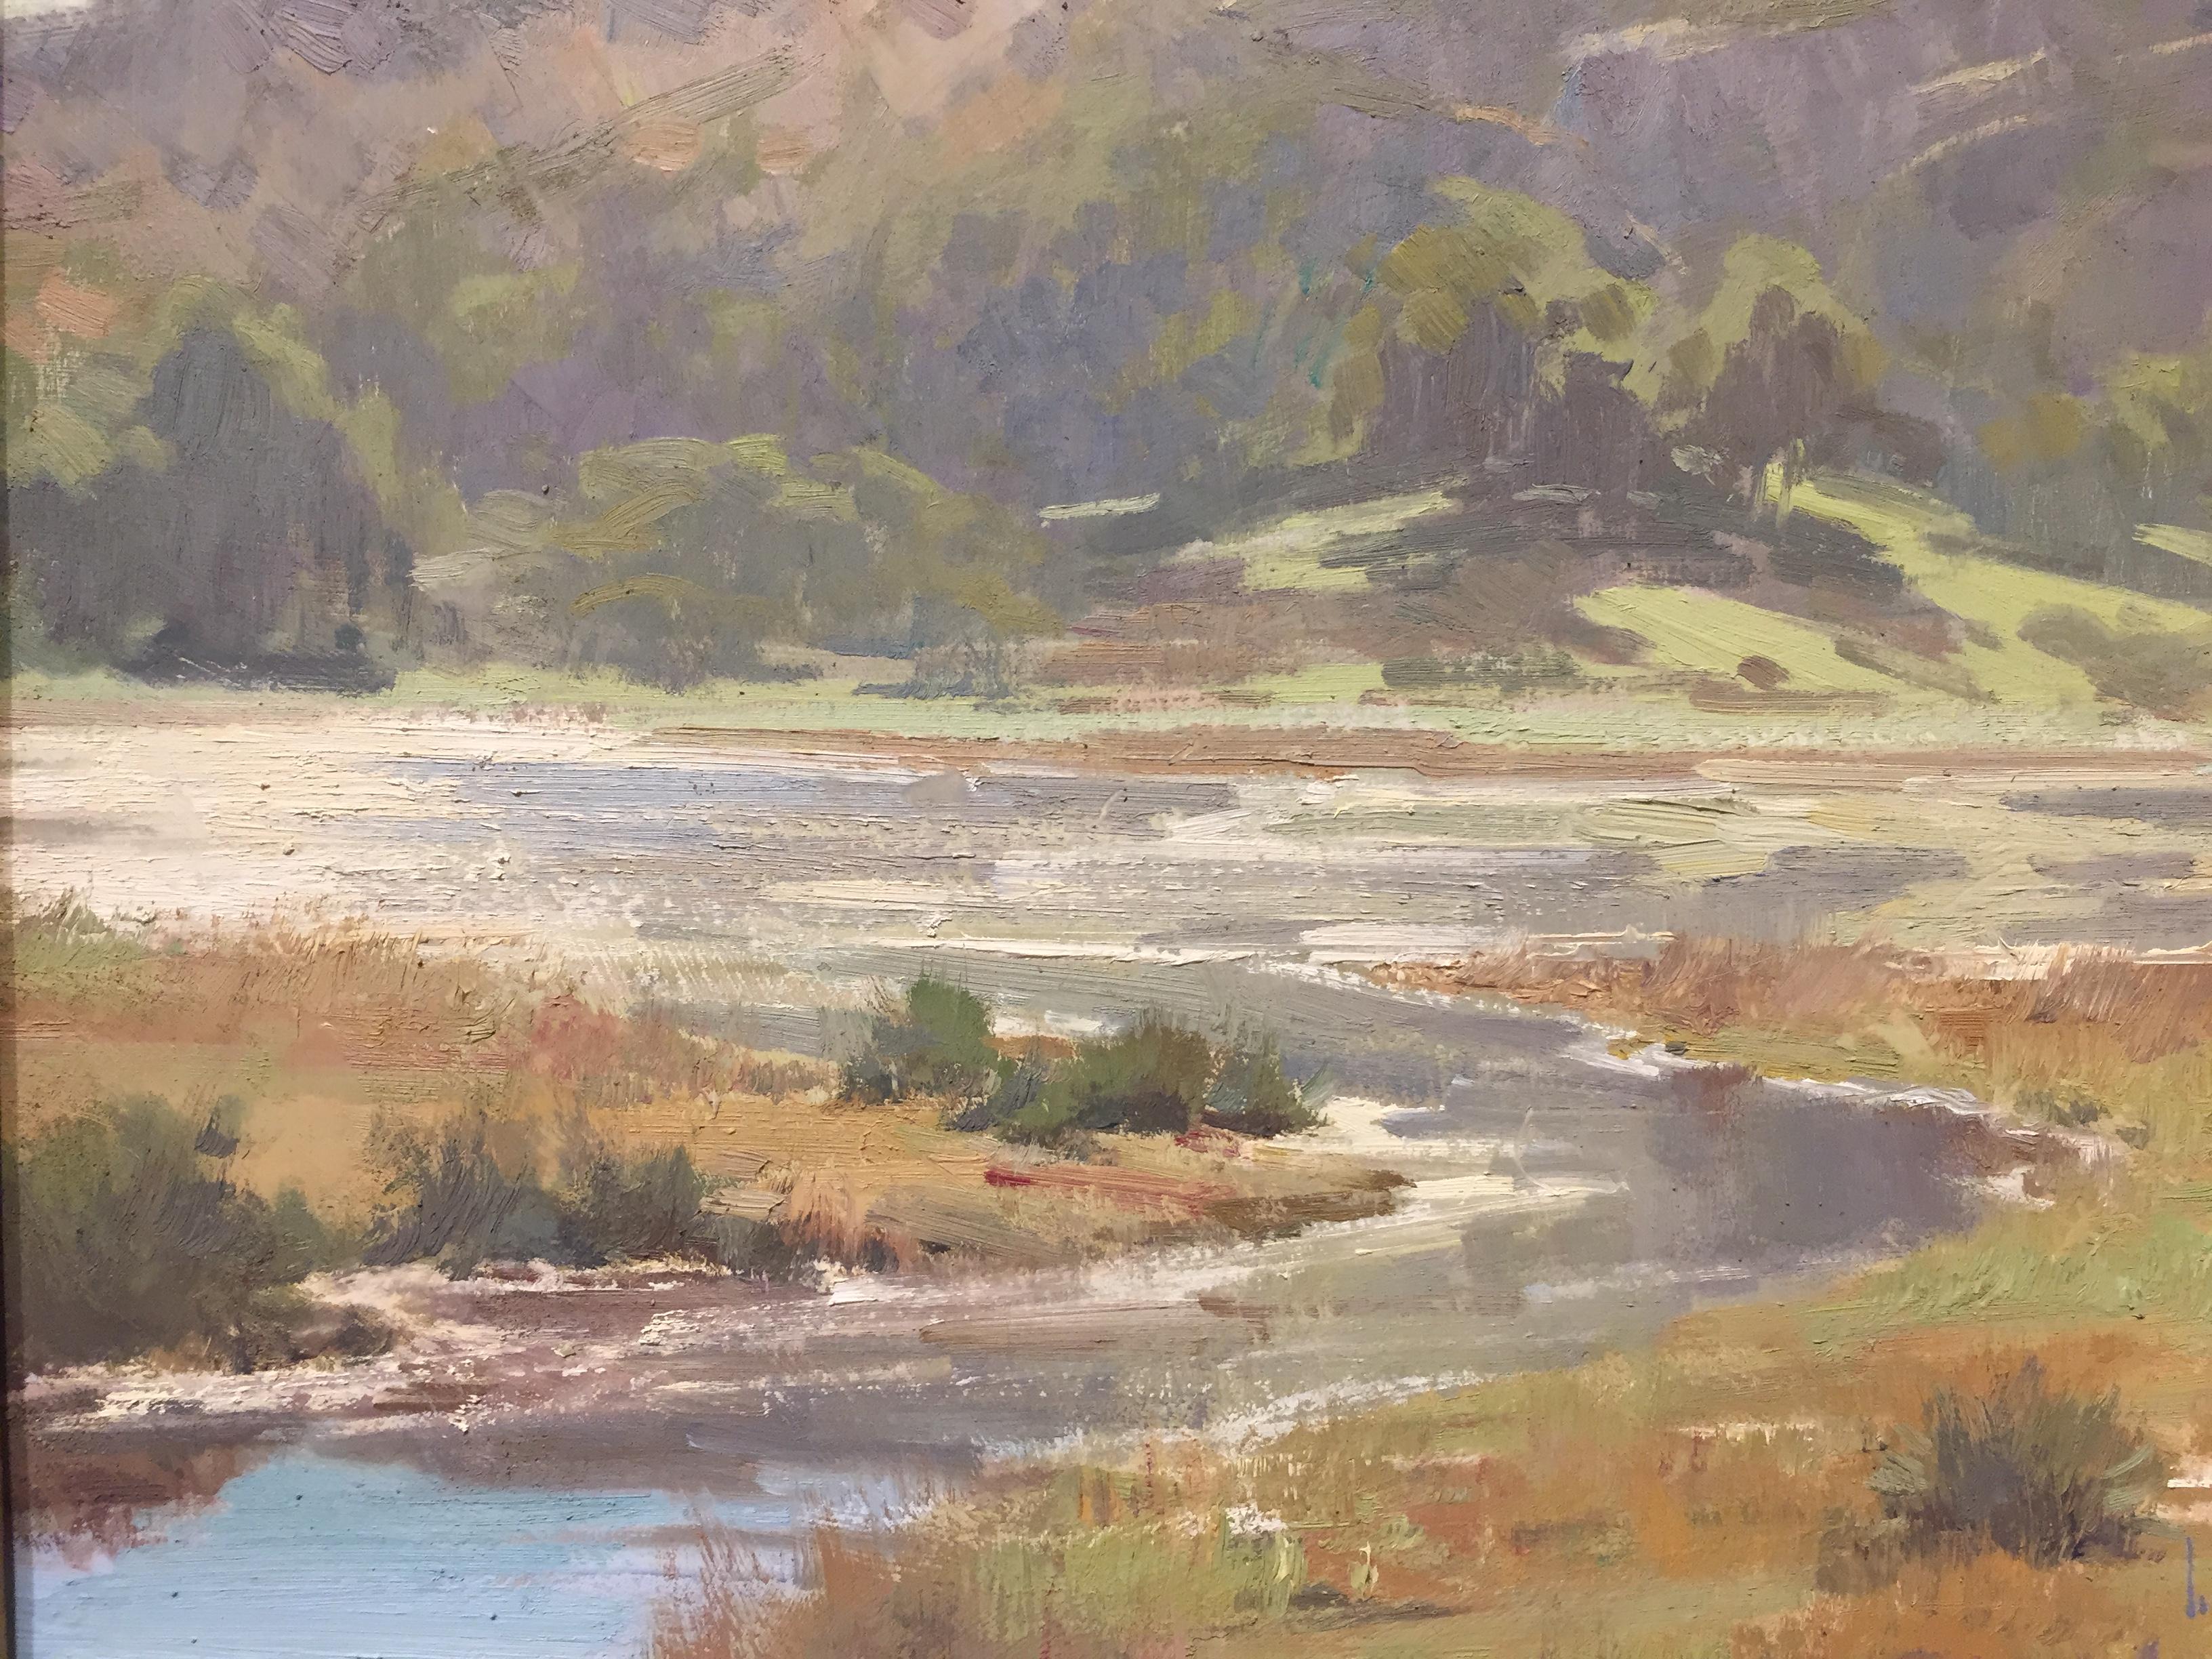 California artist Ben Young enjoys painting en plein air and he shares his passion for art with students at Watts Atelier in coastal Encinitas. Annie's Canyon trail offers breathtaking views of the ocean and lagoon below, along with shrubs that call